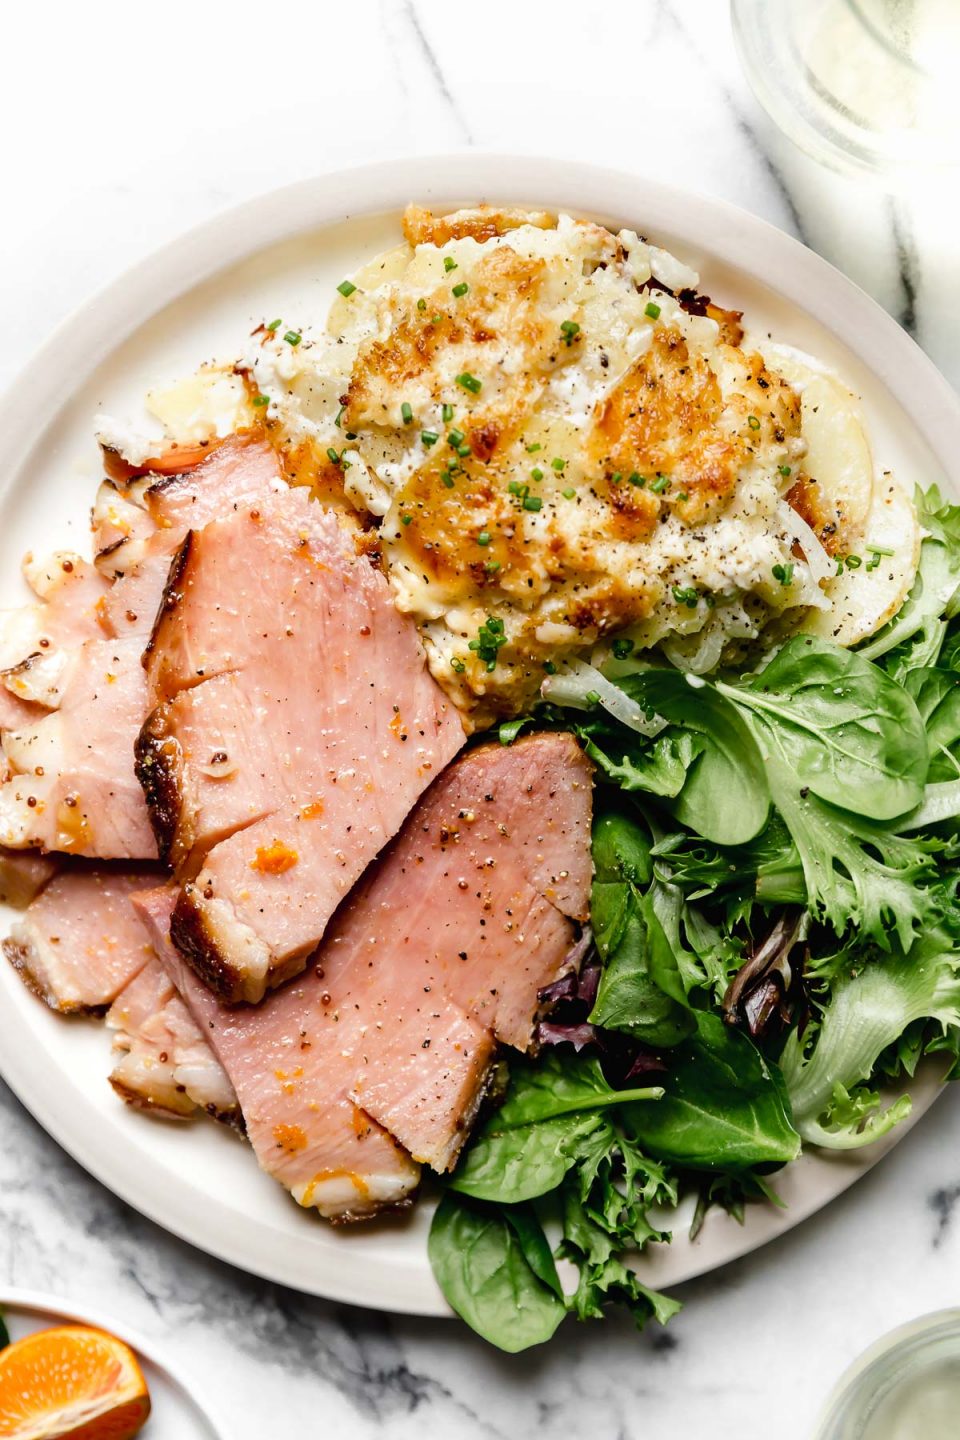 Thick slices maple glazed baked ham, plated on a dinner plate with greens & au gratin potatoes.